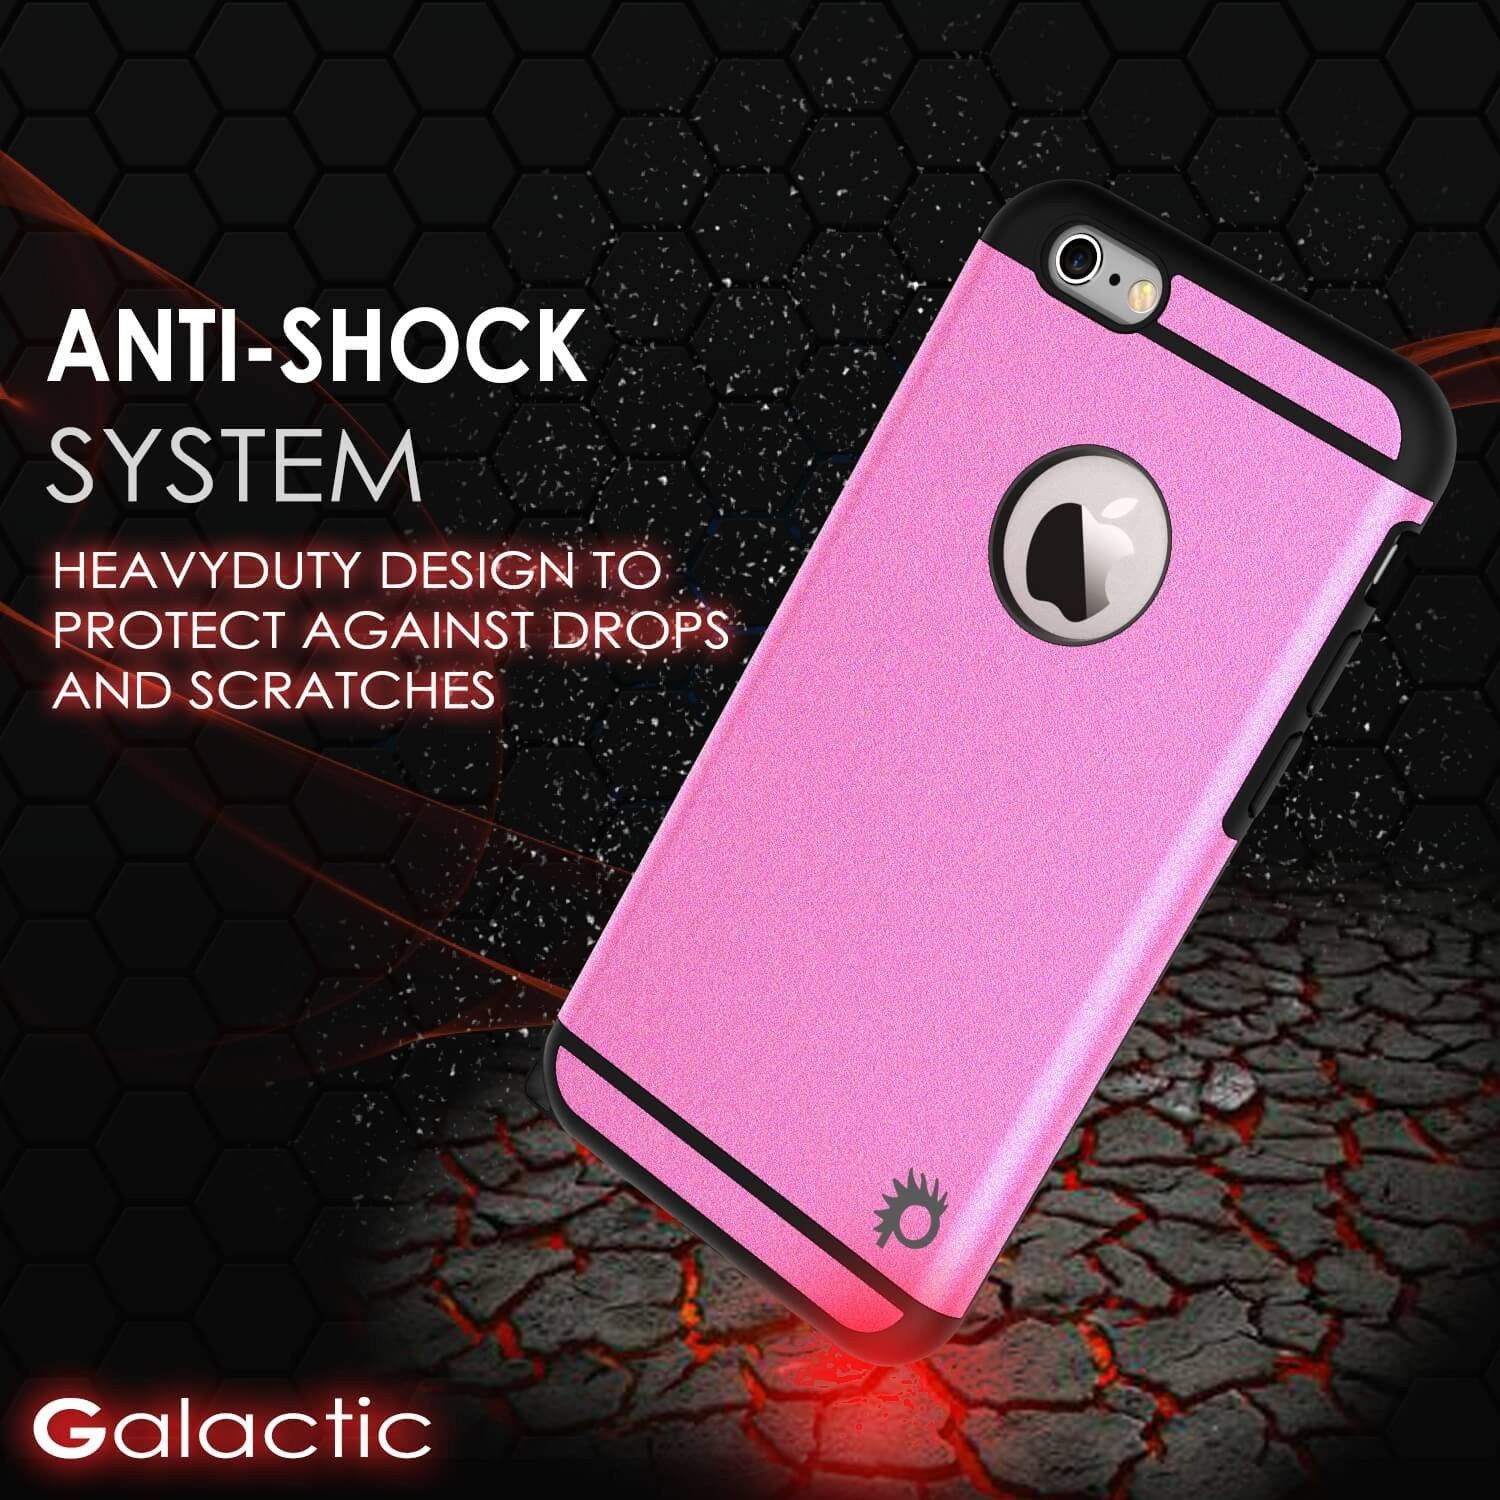 iPhone 6s Plus/6 Plus Case PunkCase Galactic Pink Slim w/ Tempered Glass Protector Lifetime Warranty - PunkCase NZ